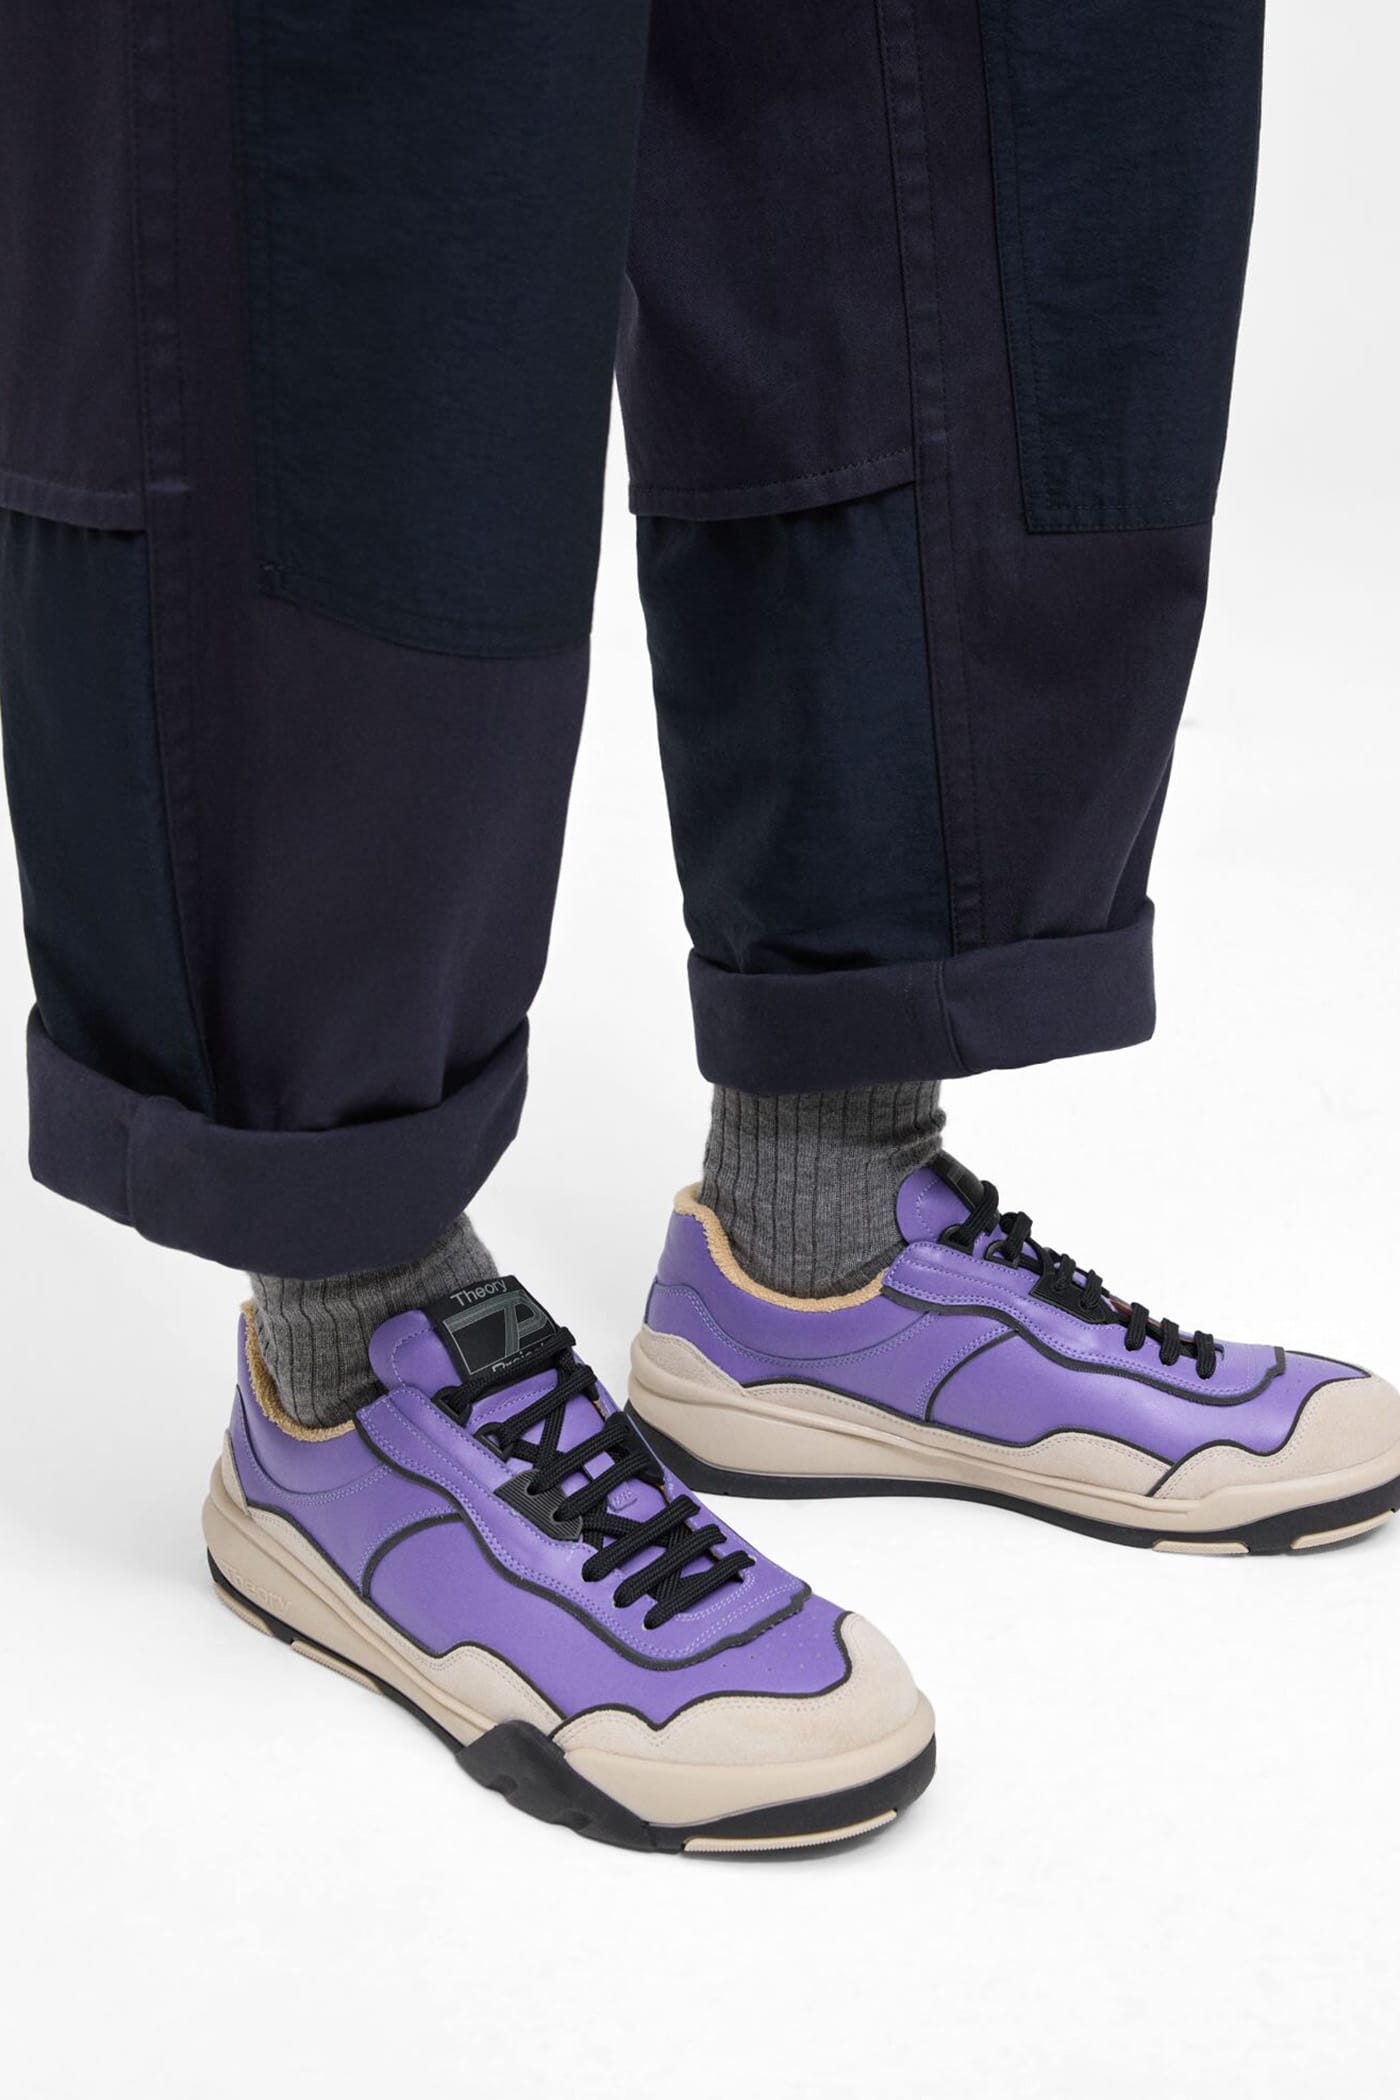 Theory Spring 2023 Collection Theory Project Outerwear Sneakers